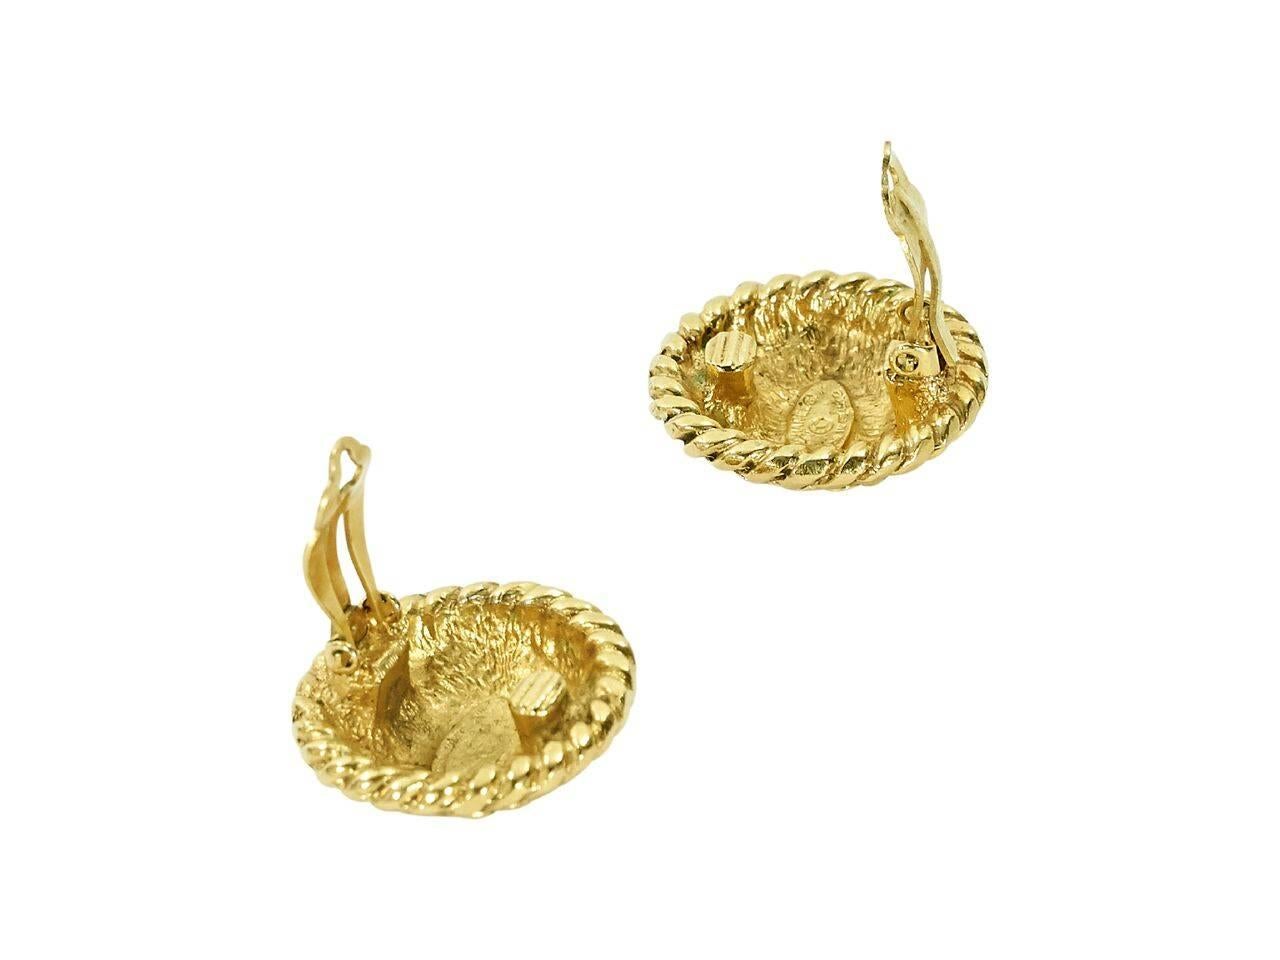 Product details:  Vintage goldtone clip-on earrings by Chanel.  Circular design with CC logo center.  1